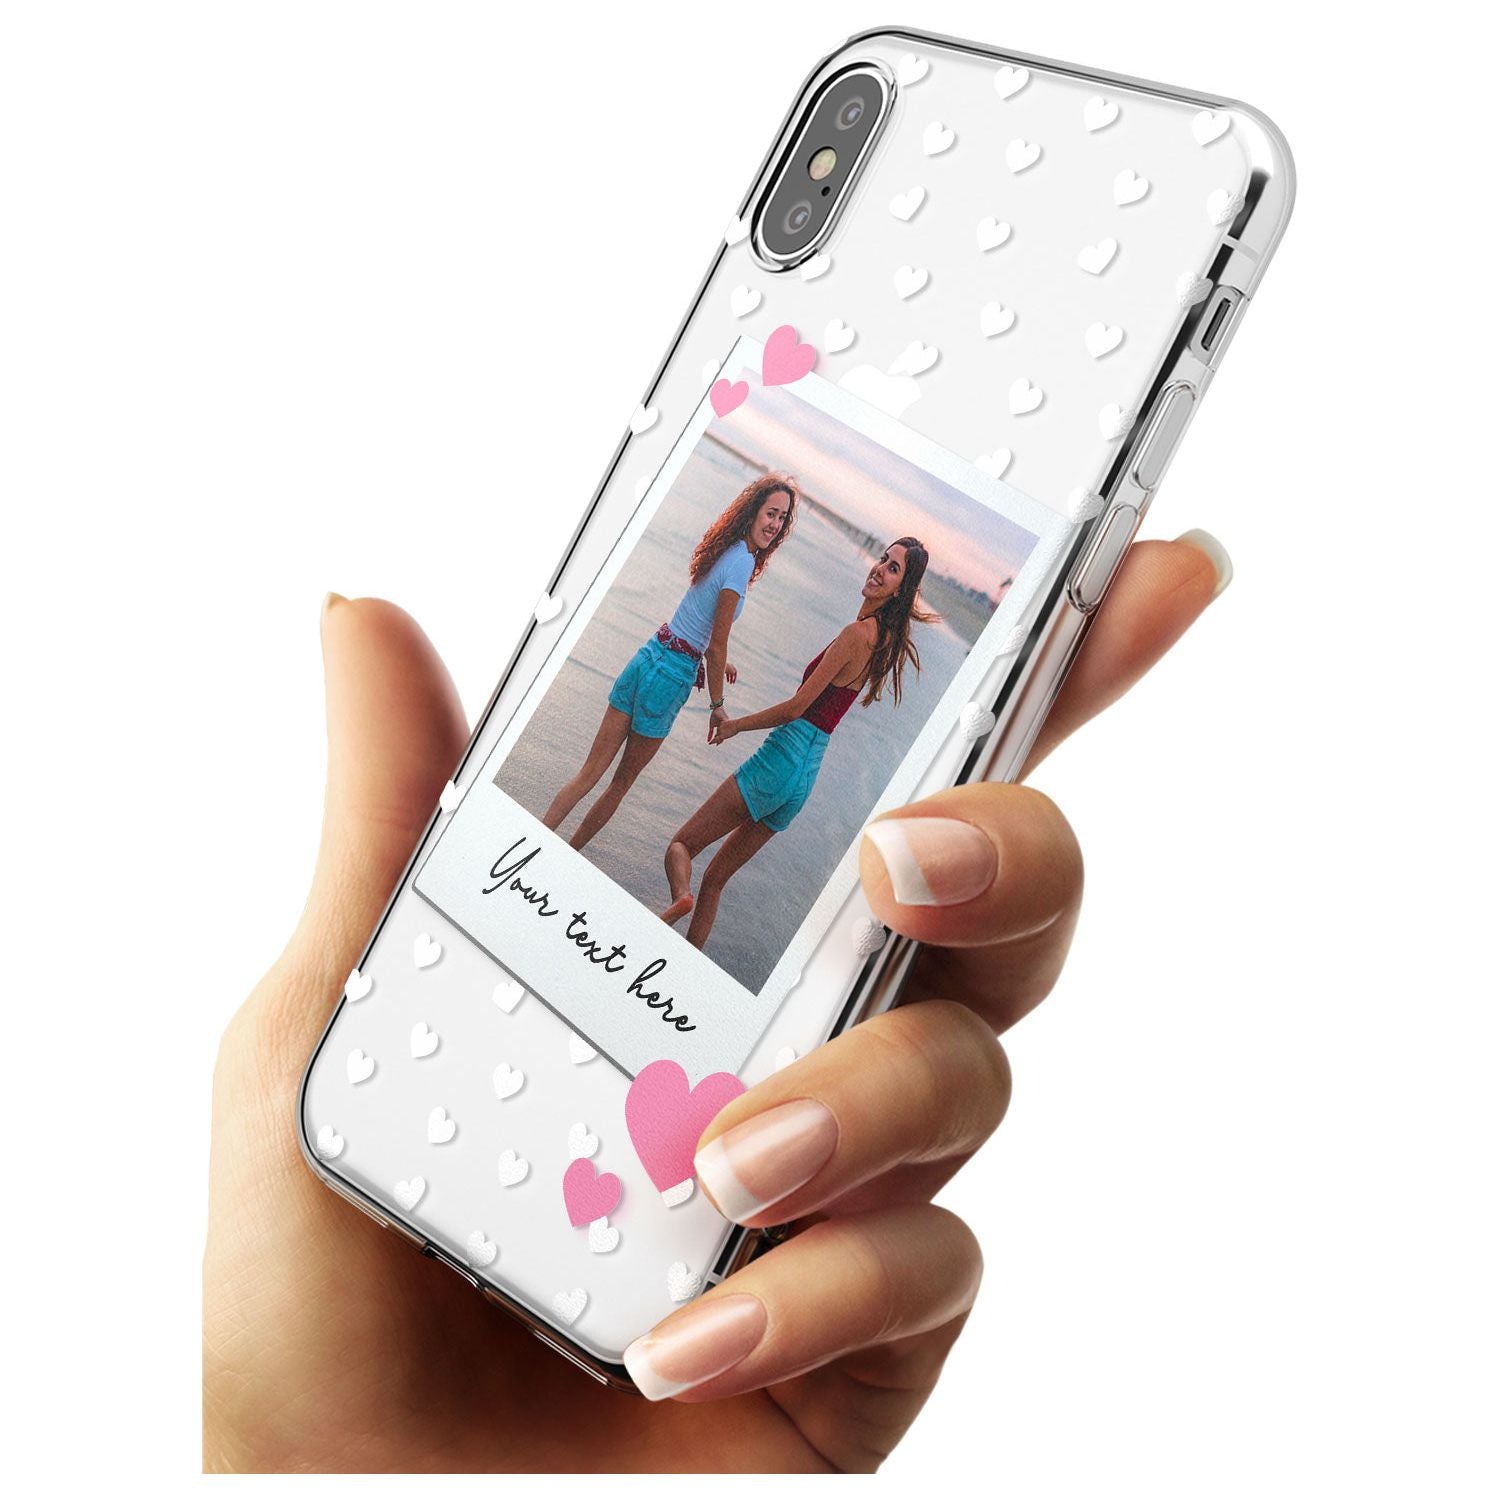 Instant Film & Hearts Black Impact Phone Case for iPhone X XS Max XR